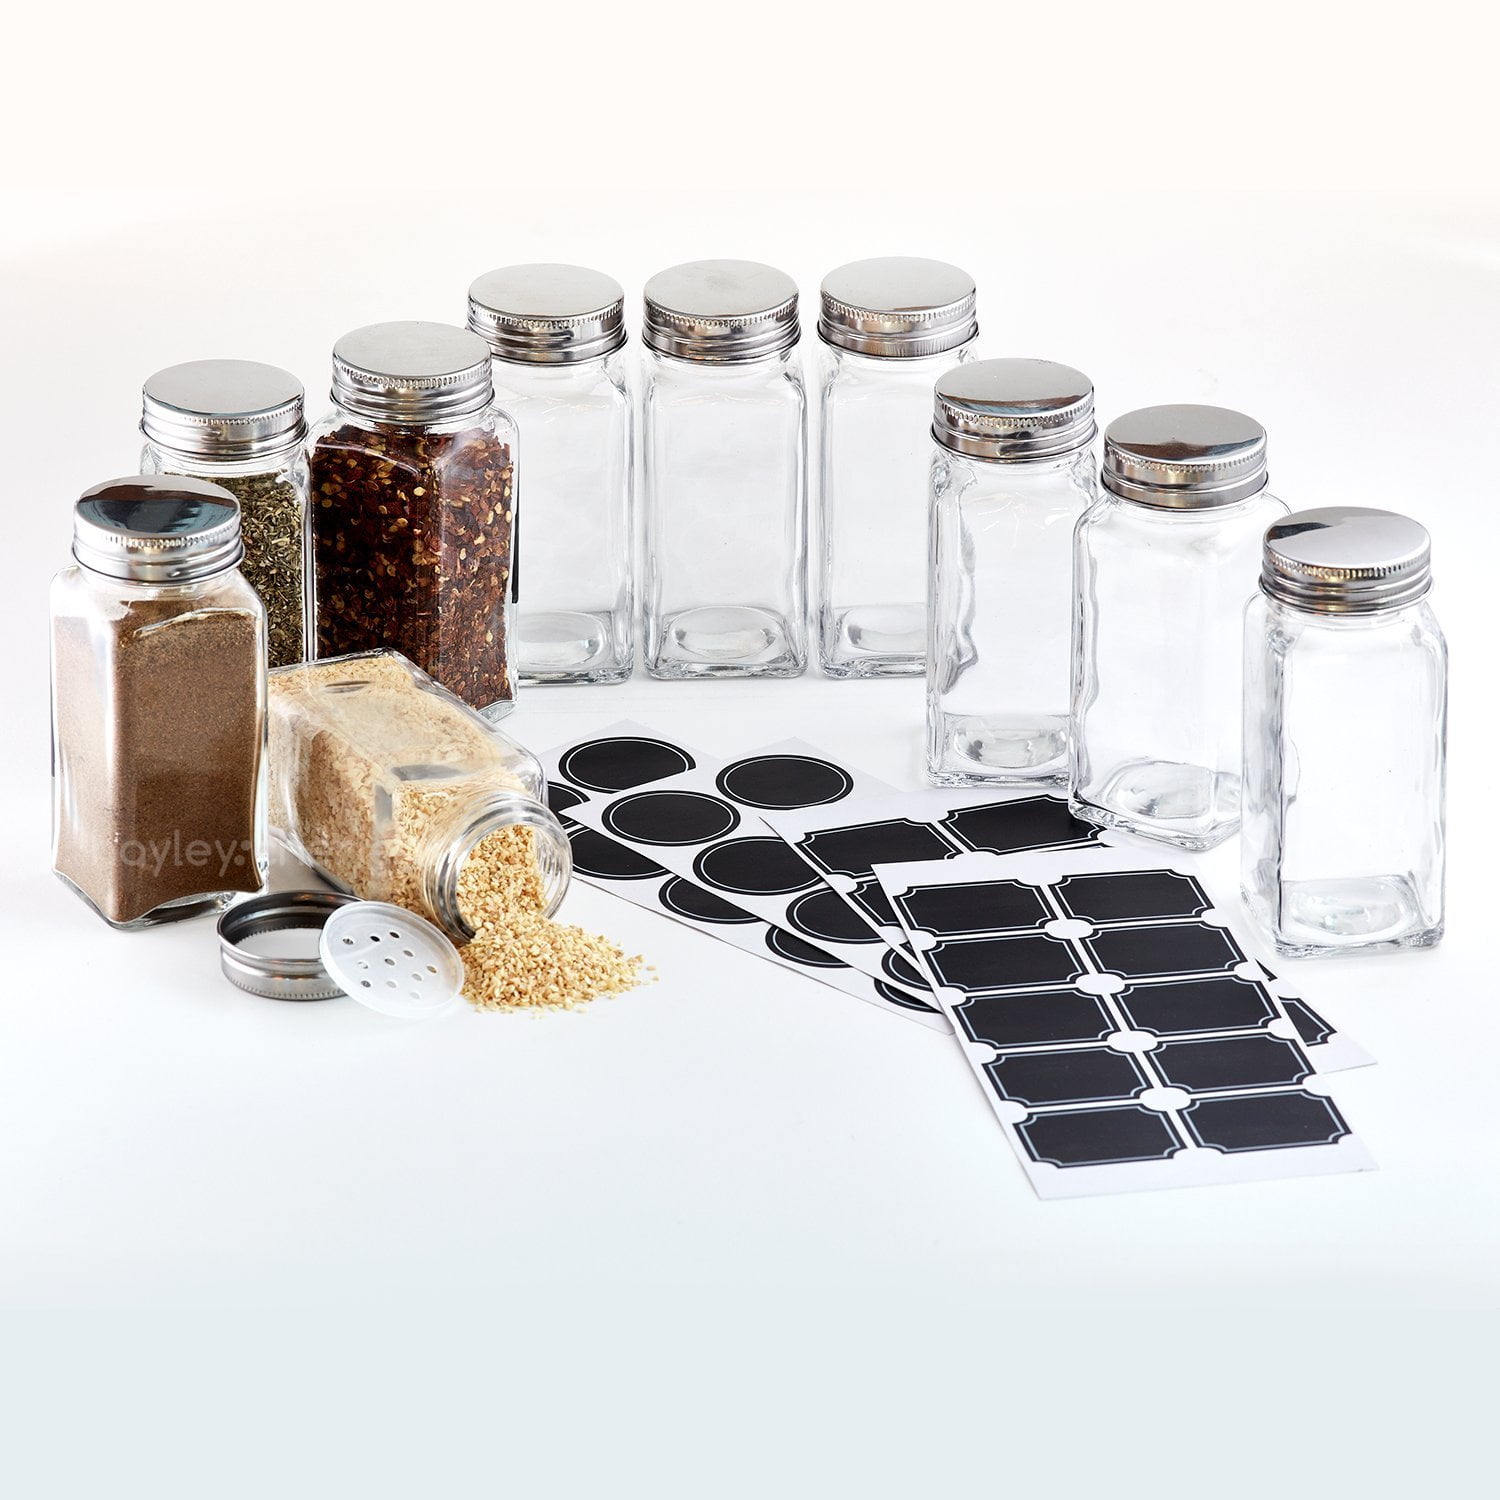 - 6 Oz Large Square Glass Spice Jars (Set of 10) - Chalkboard Labels Stainless Steel Glass Spice Jars